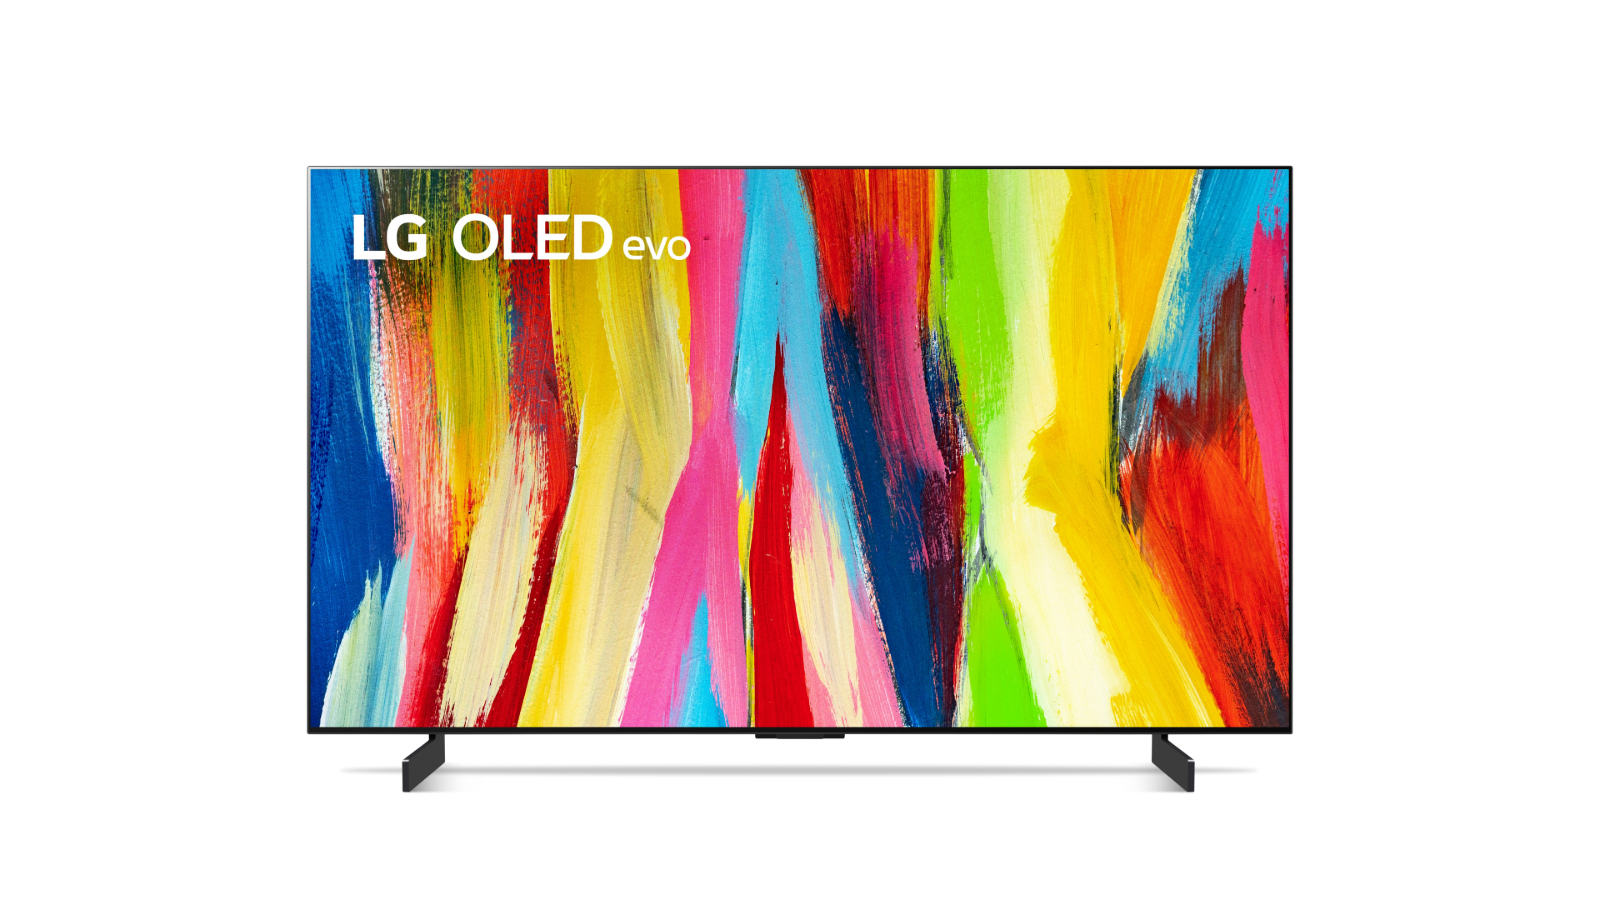 LG announces new OLED TV lineup for 2022